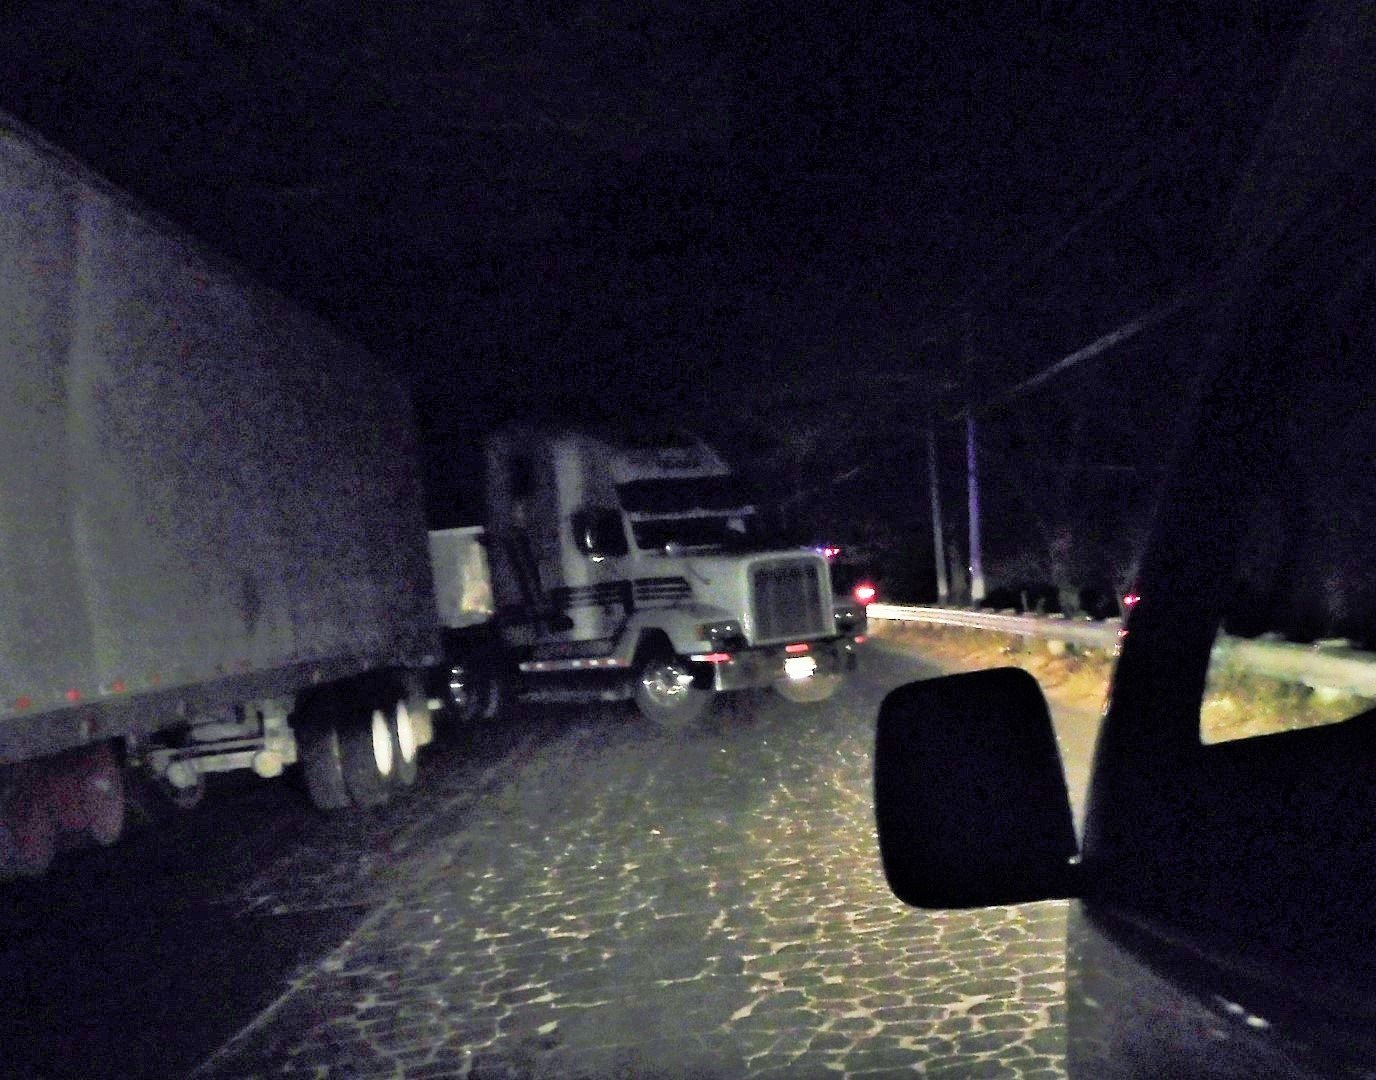 Trying to return to El Tunco, the truck drivers were Guatemalan and something had made them very angry